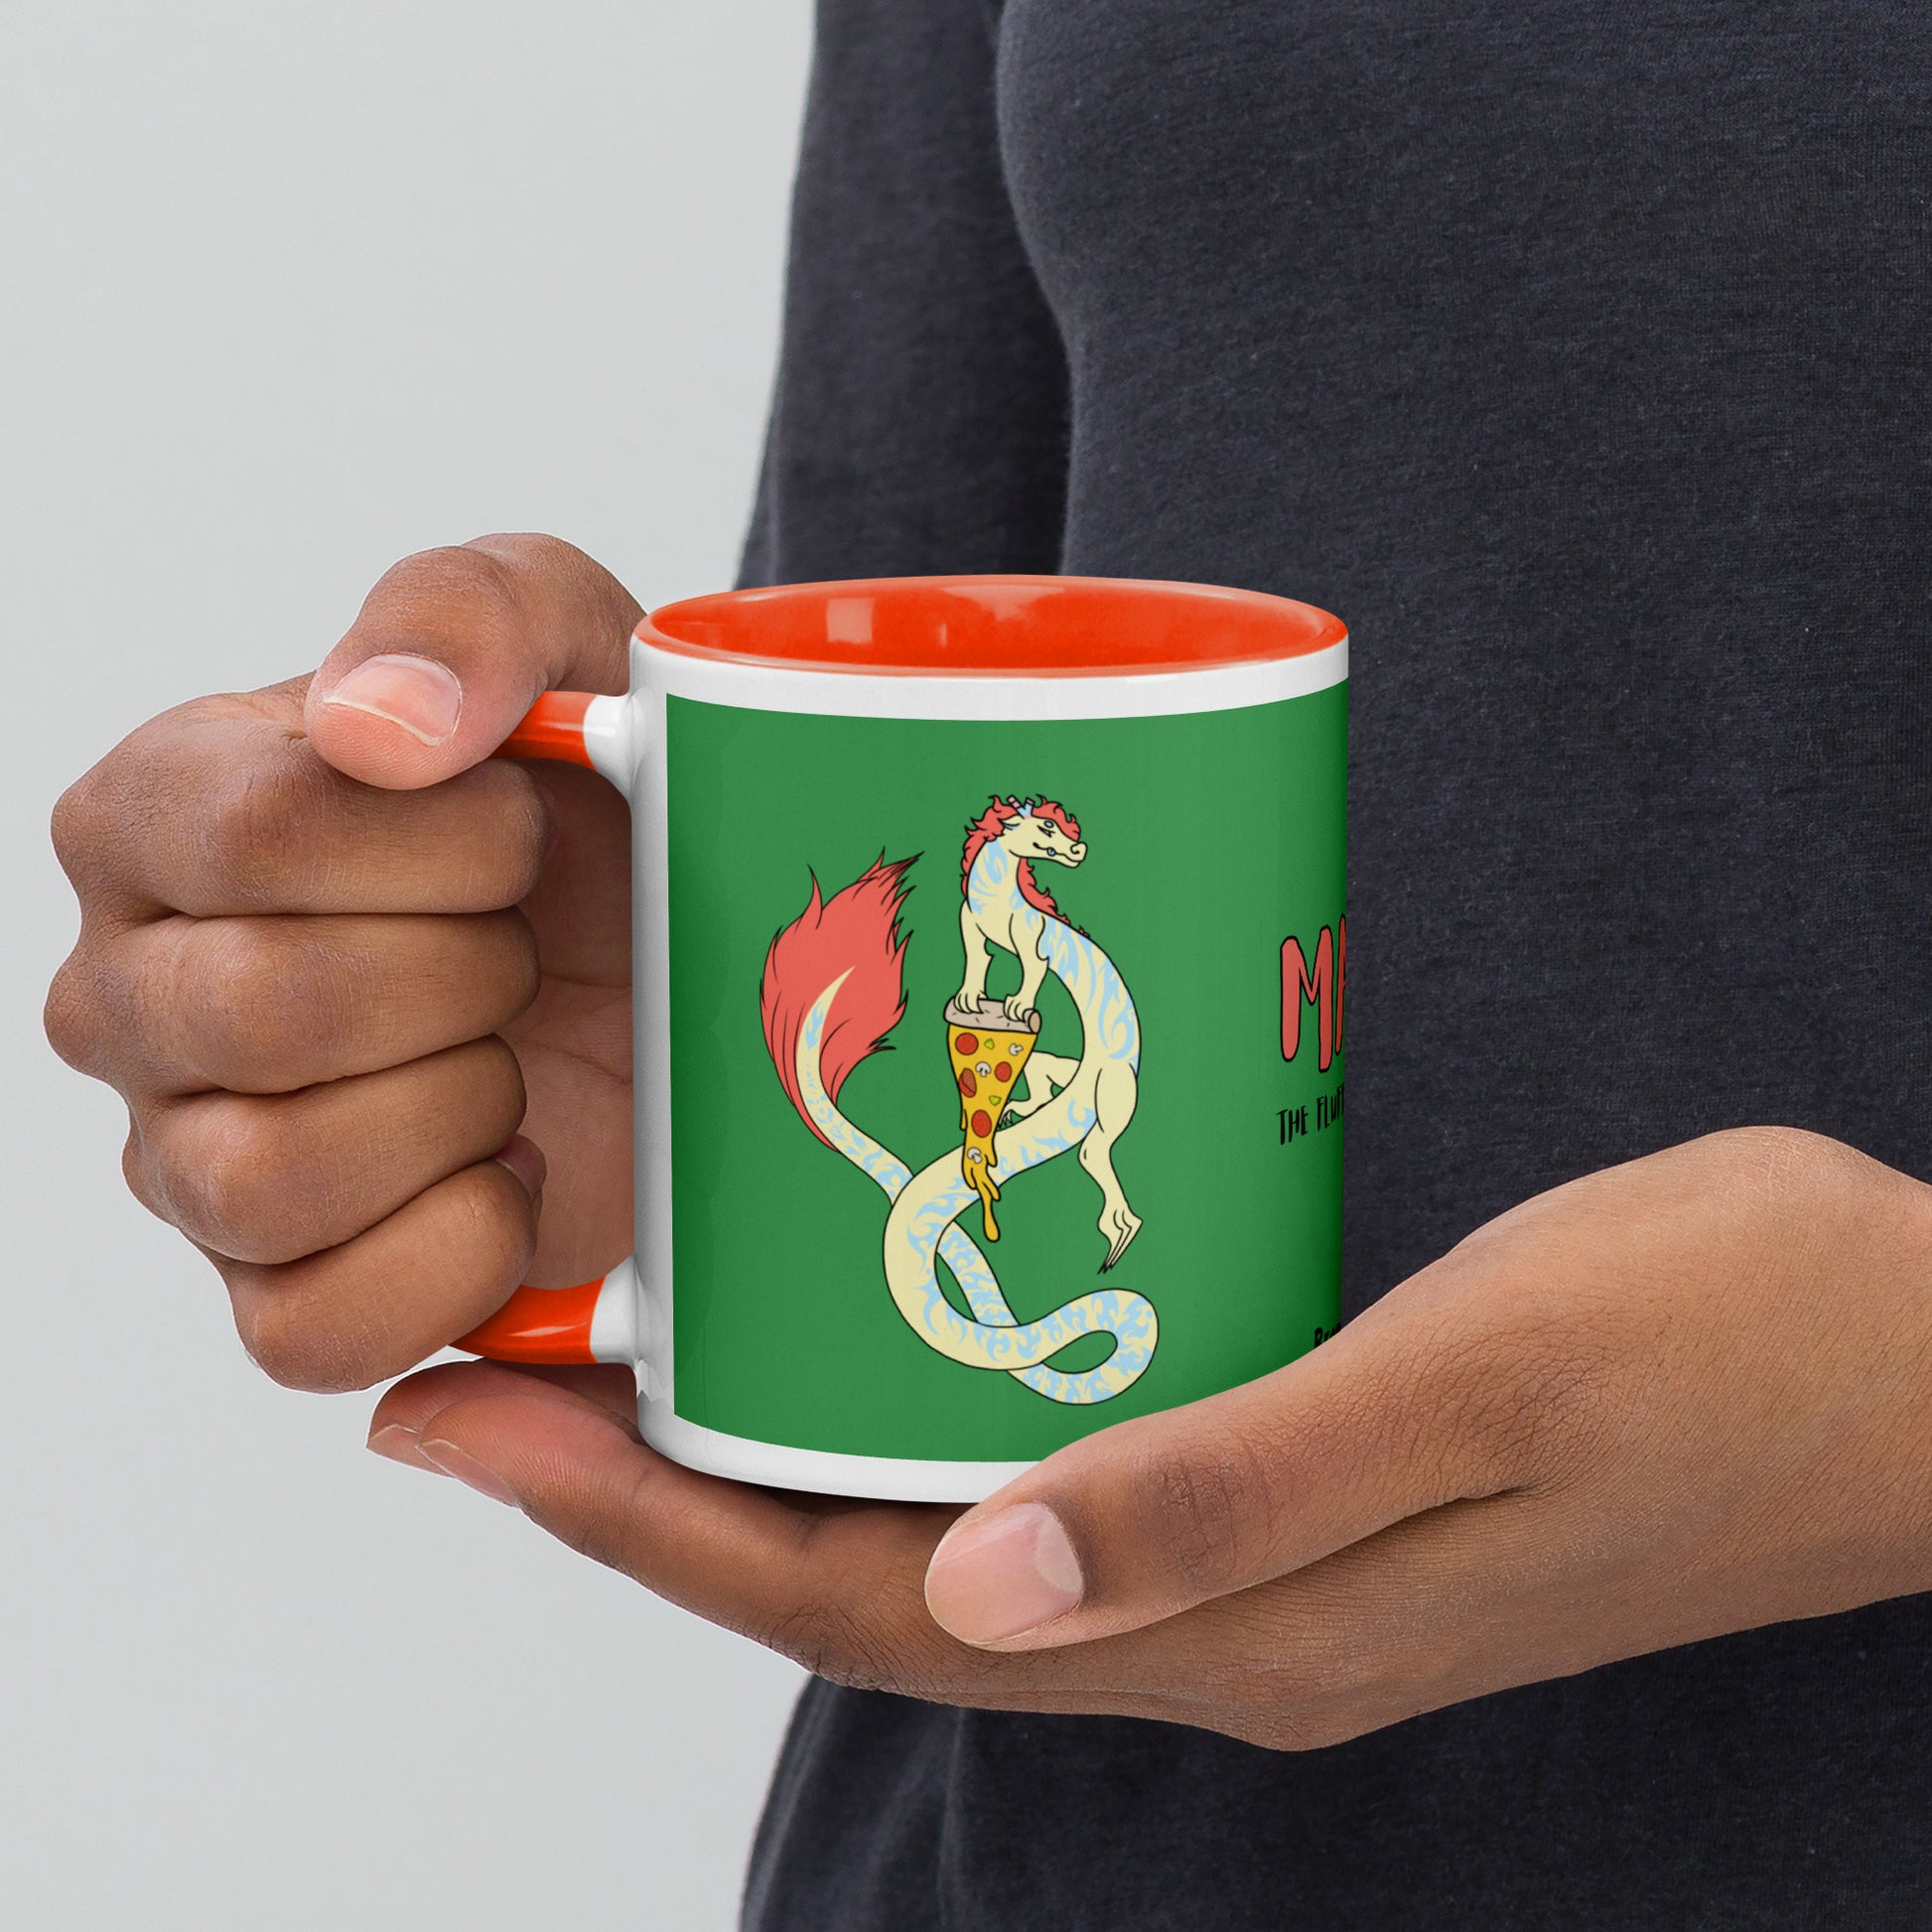 11 ounce white ceramic mug. Orange inside and handle. Features double-sided image of Maisy the Fuzzy Noodle Dragon with a slice of pizza. Shown in model's hands.